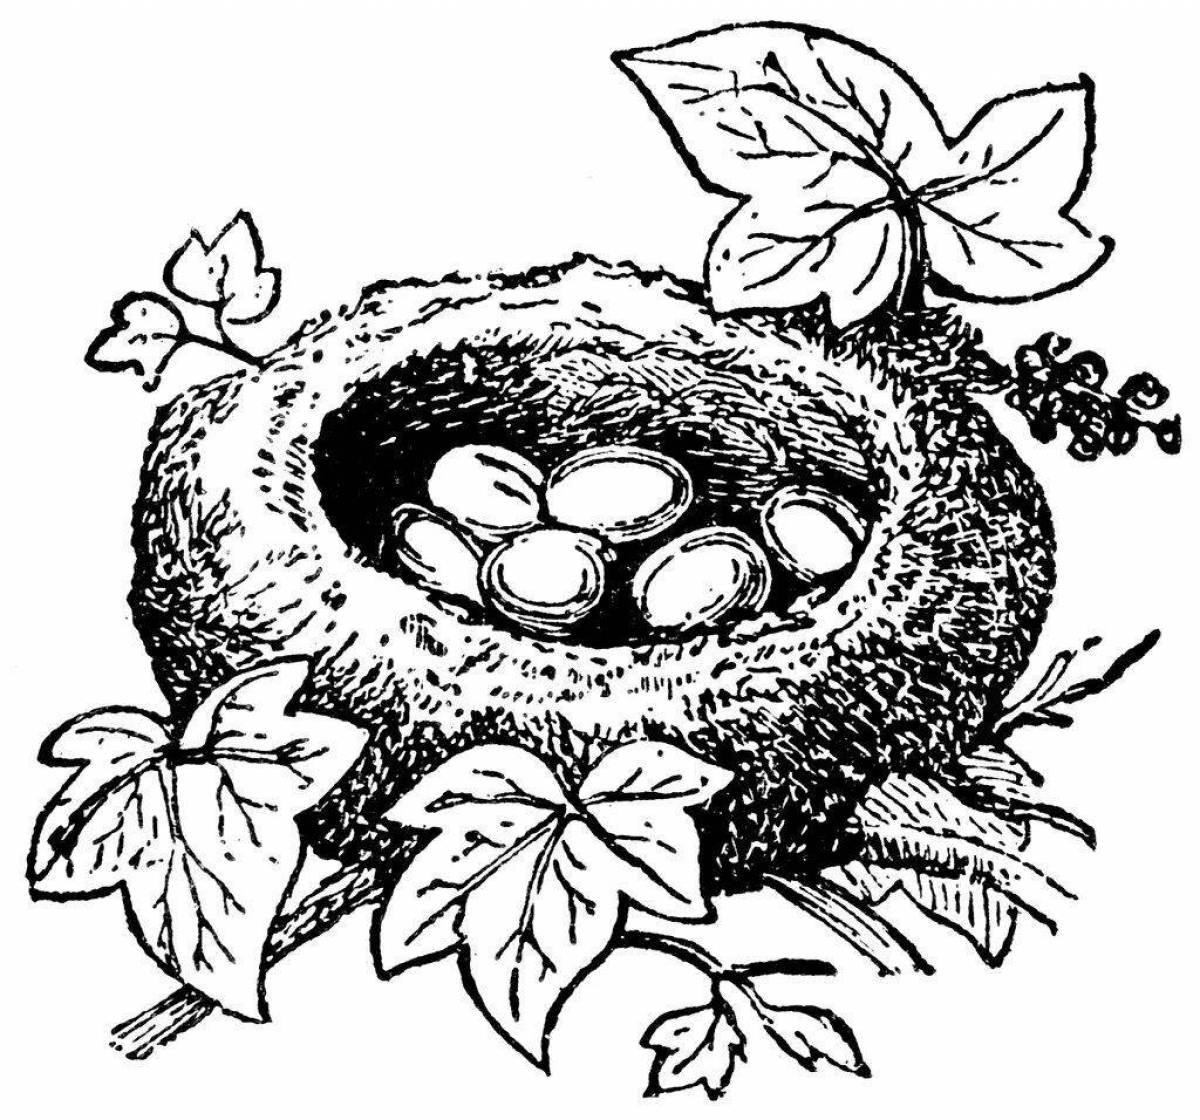 Adorable nest coloring page for kids